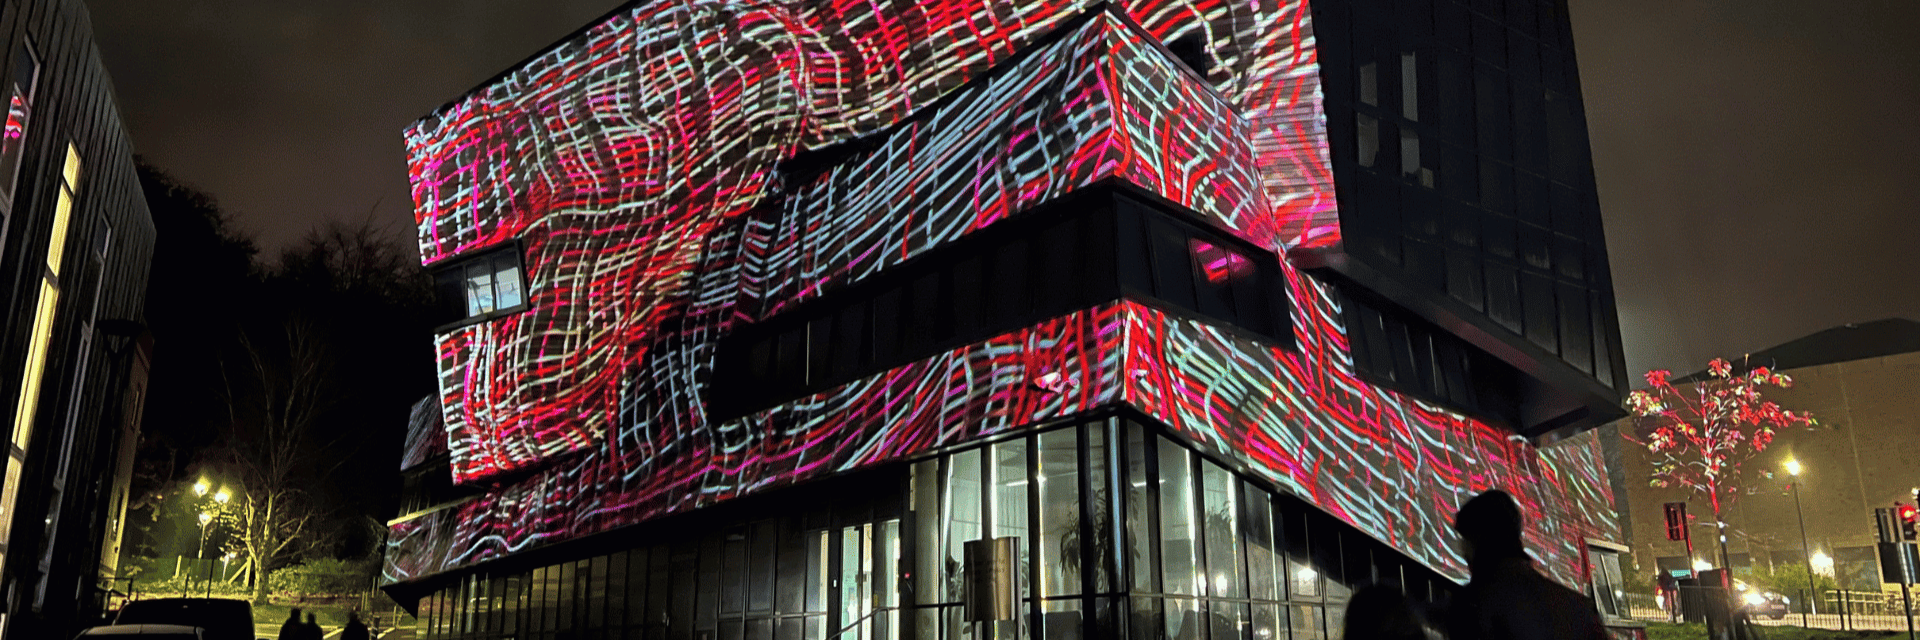 The Ogden Centre at night illuminated by red and pink art